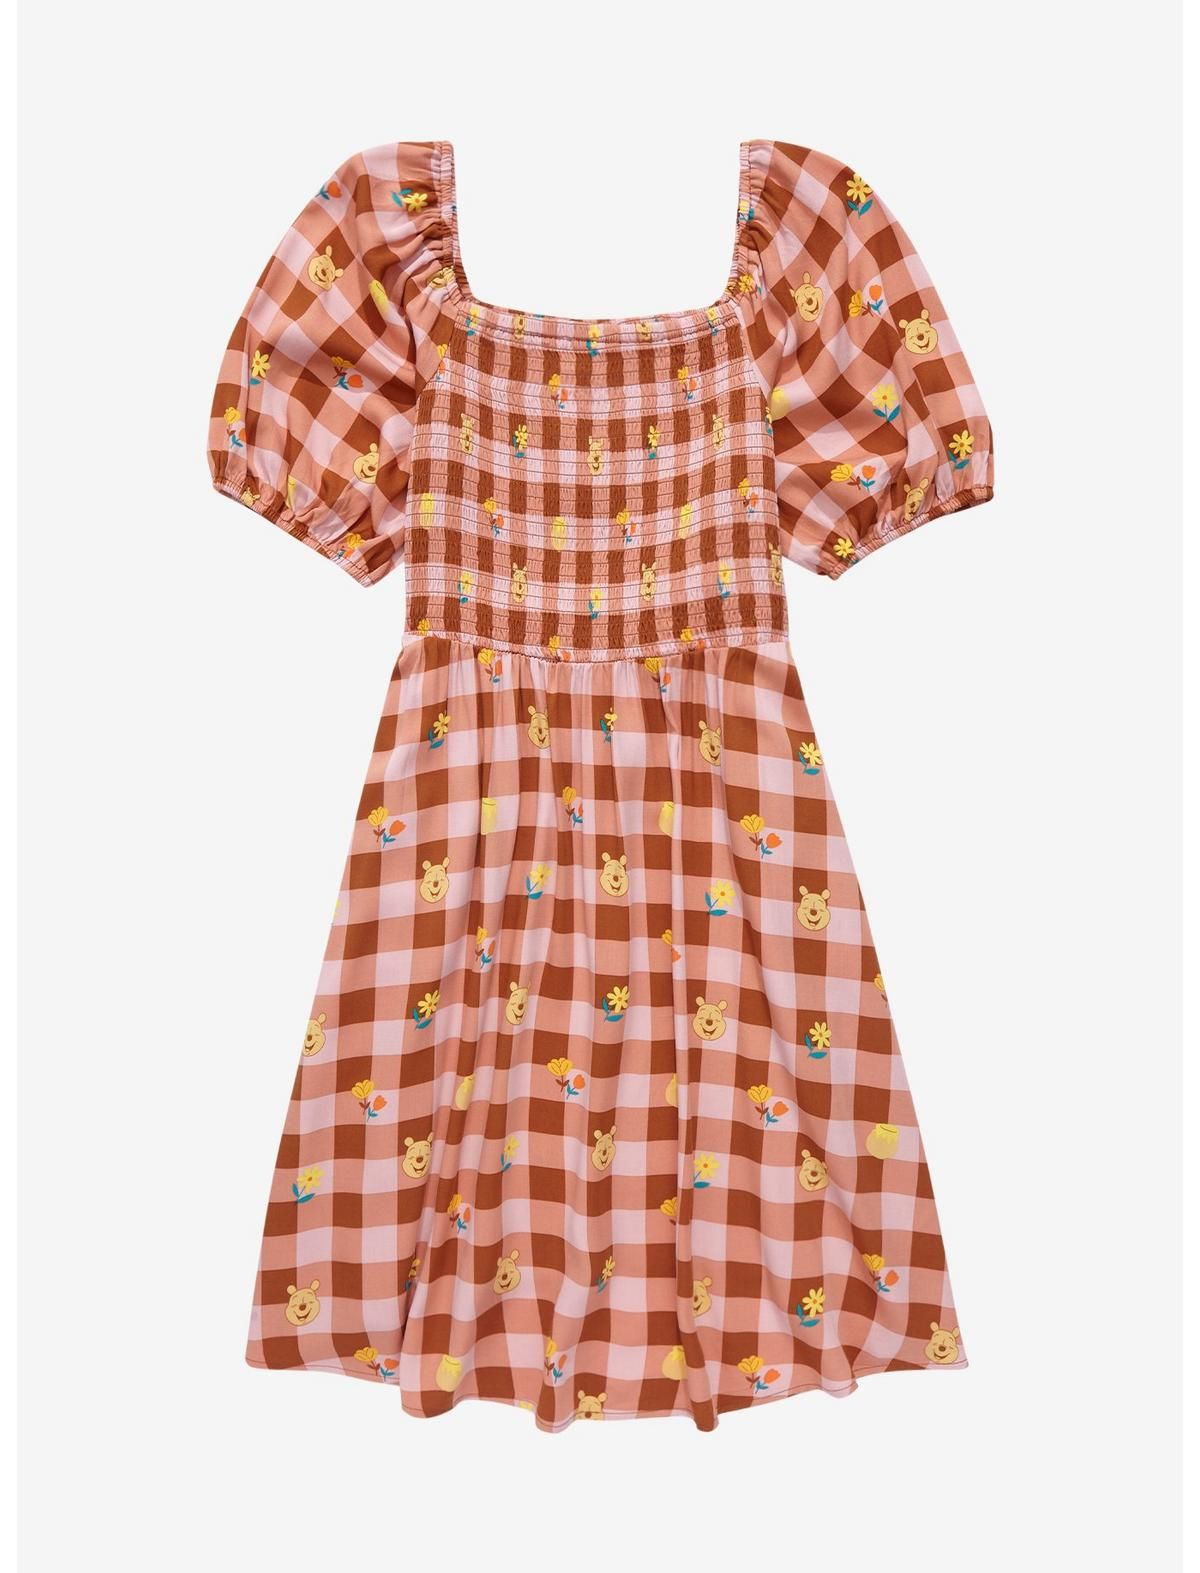 Winnie the Pooh Gingham Smock Dress - BoxLunch Exclusive | BoxLunch